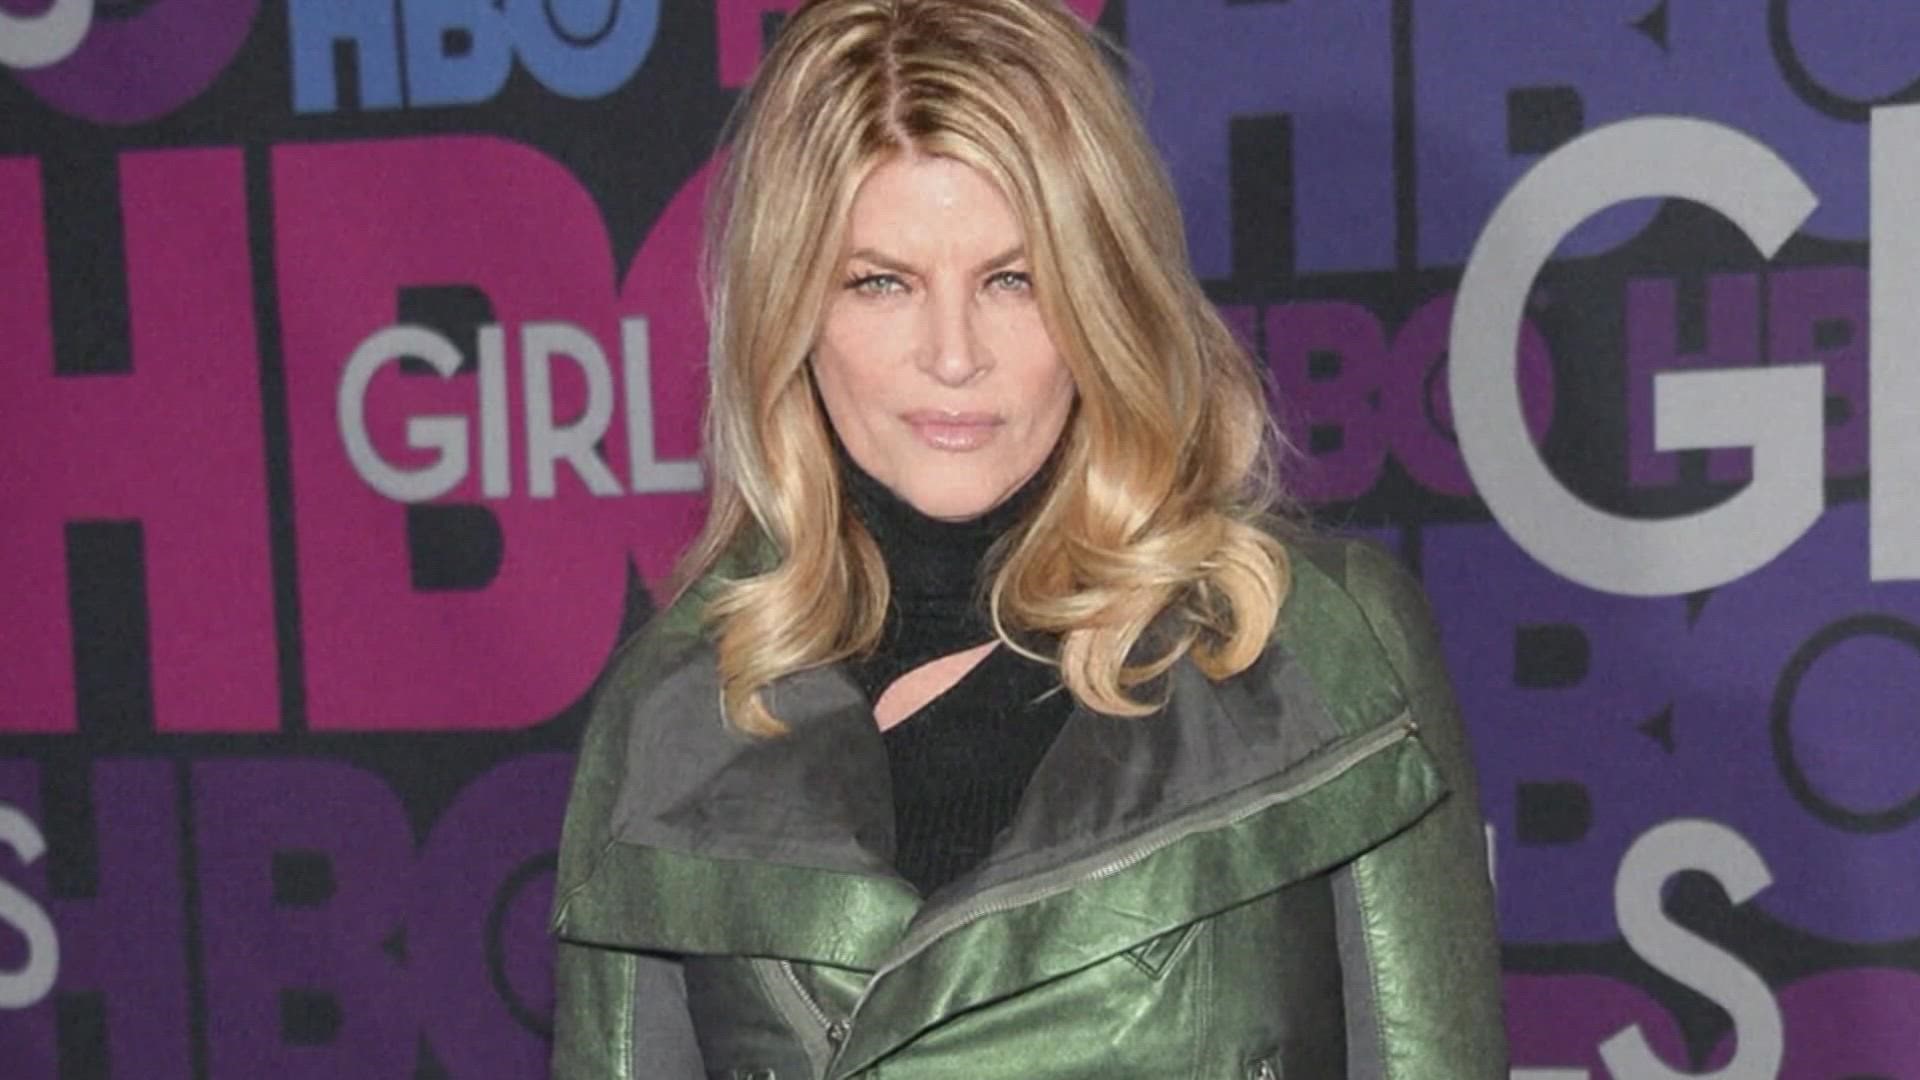 Celebrities took to social media to offer condolences and tributes to 'Cheers' actress Kirstie Alley.